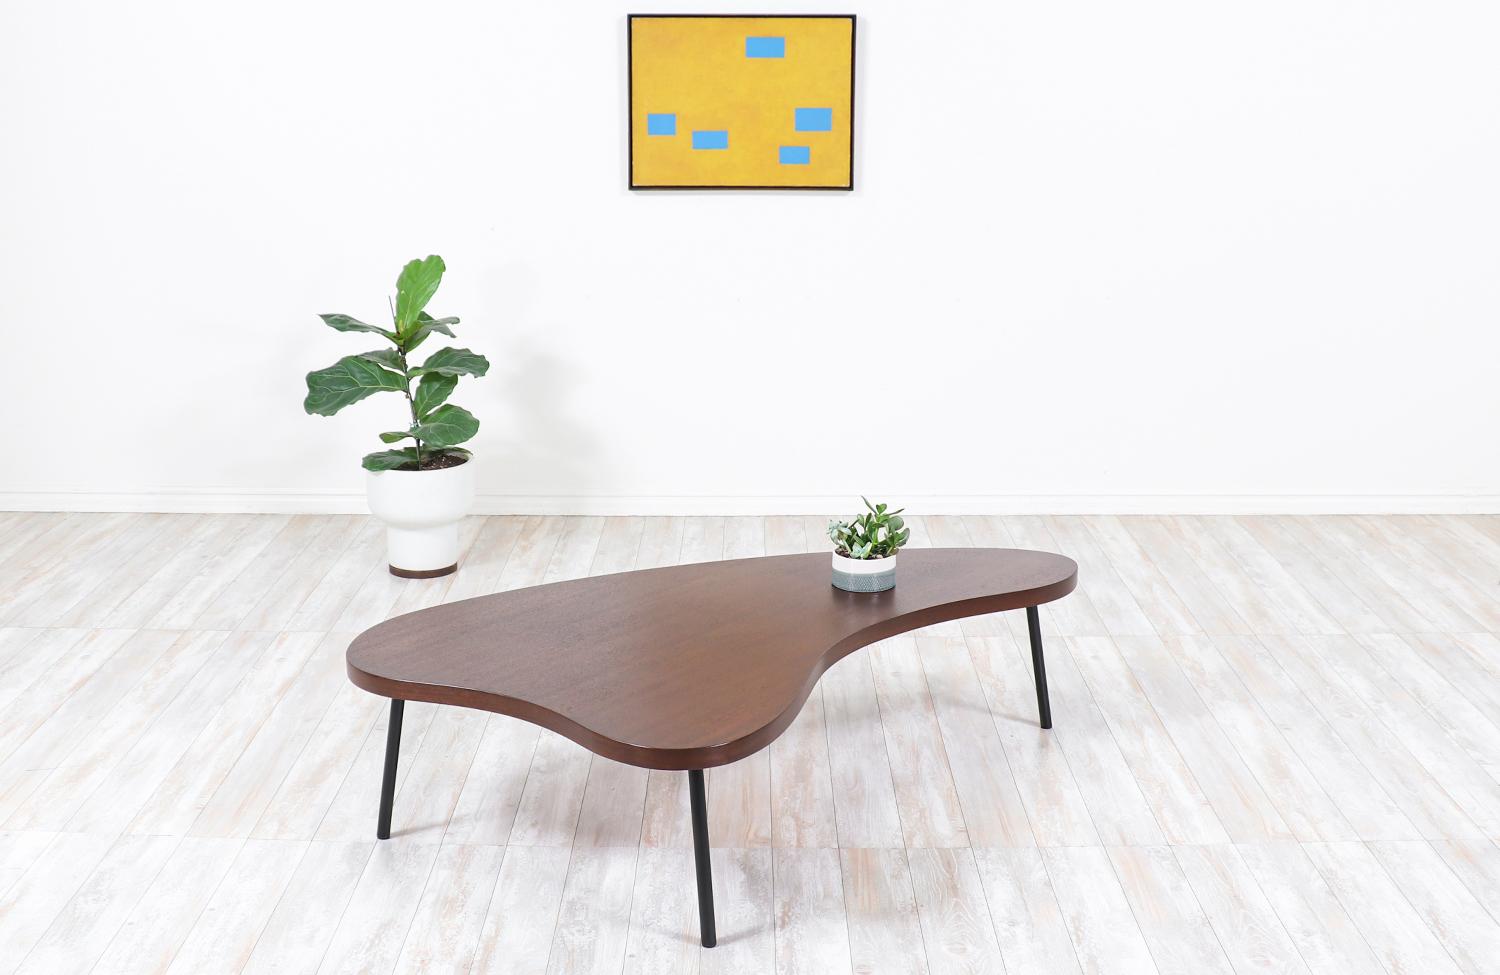 Vintage modern freeform coffee table designed and manufactured by Vista of California in the United States during the 1950s. Our Minimalist Mid-Century Modern table features a beautiful and solid wood top with an organic shape for a stunning grain